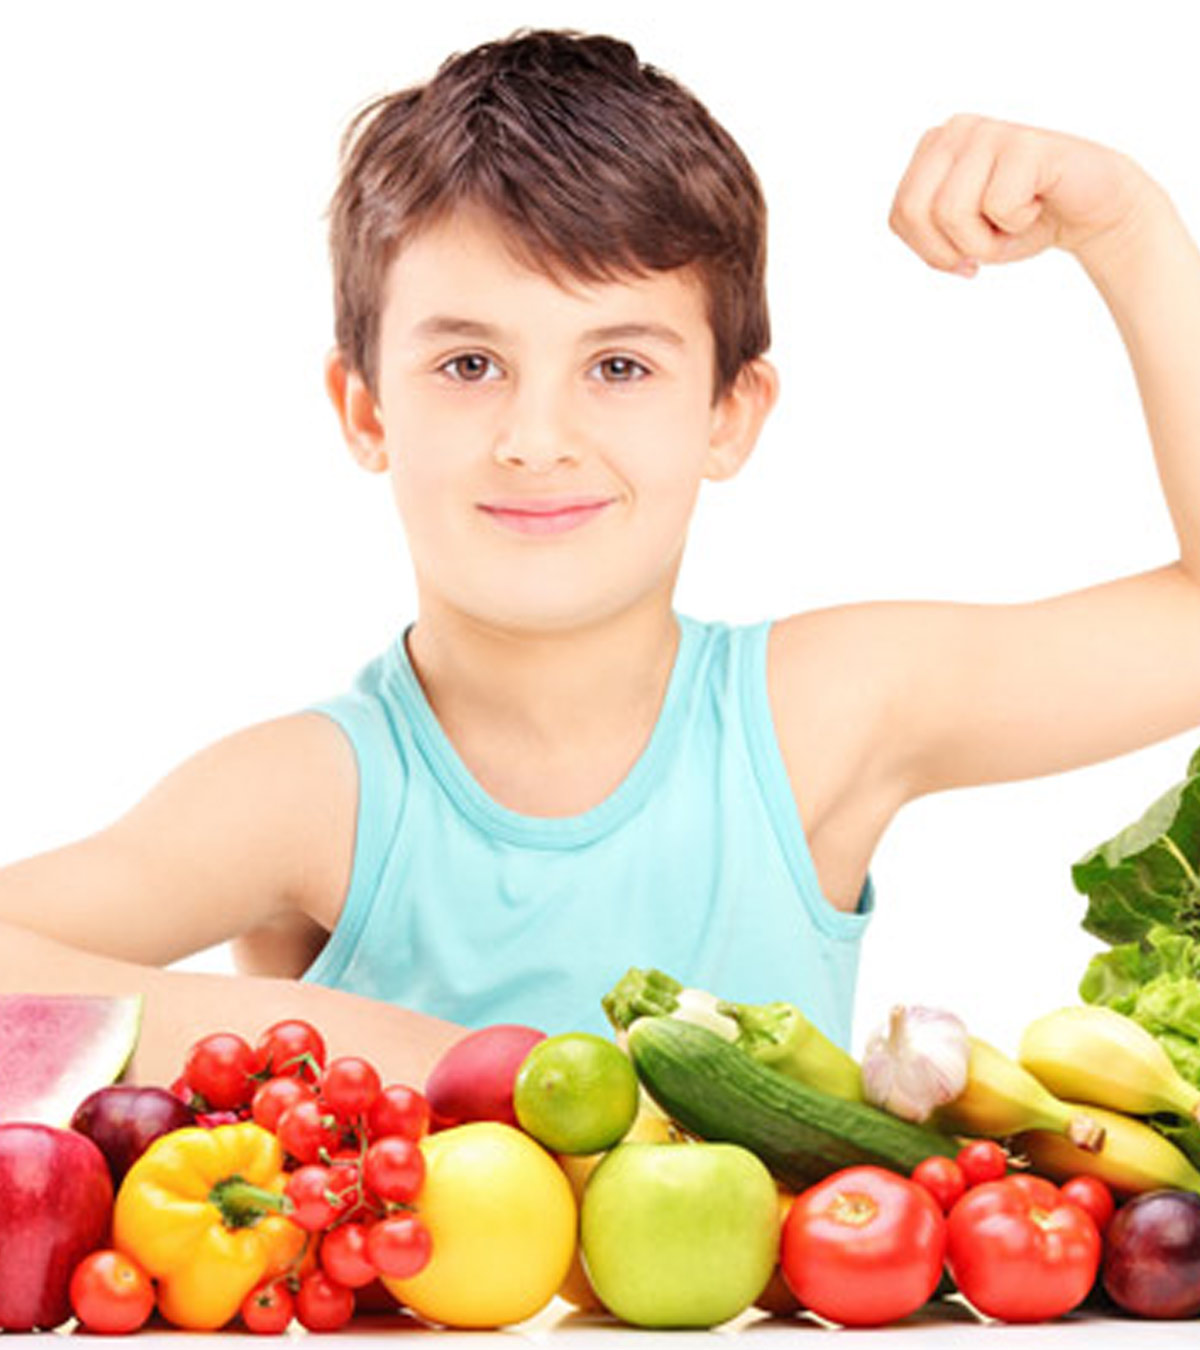 Vitamin C For Kids: Why Do They Need It And What's The Dosage